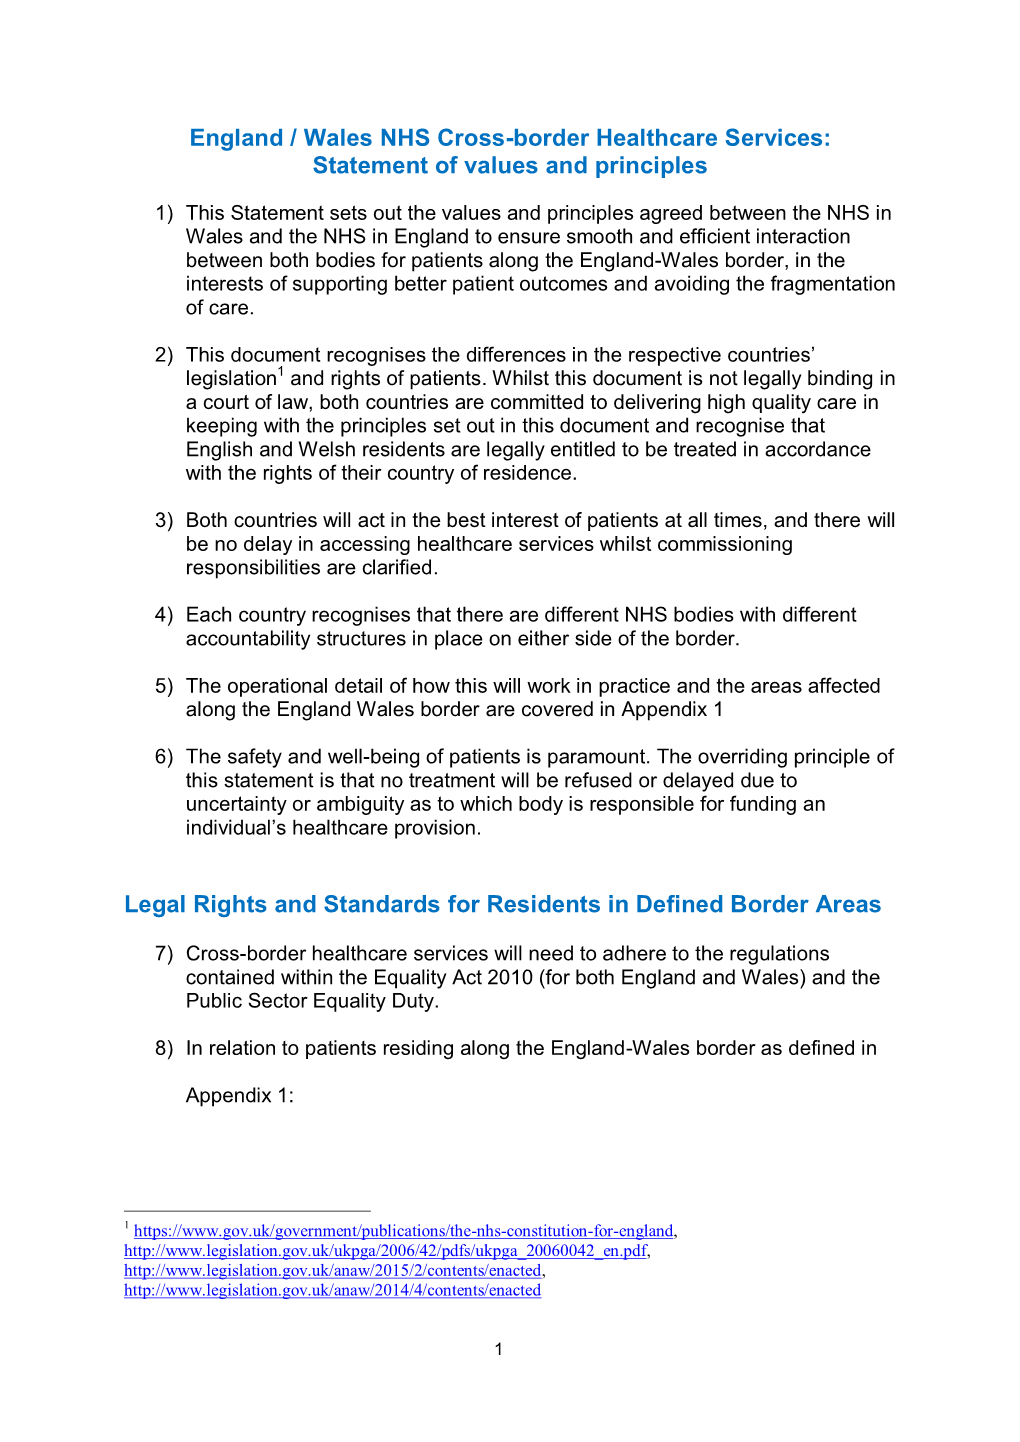 England / Wales NHS Cross-Border Healthcare Services: Statement of Values and Principles